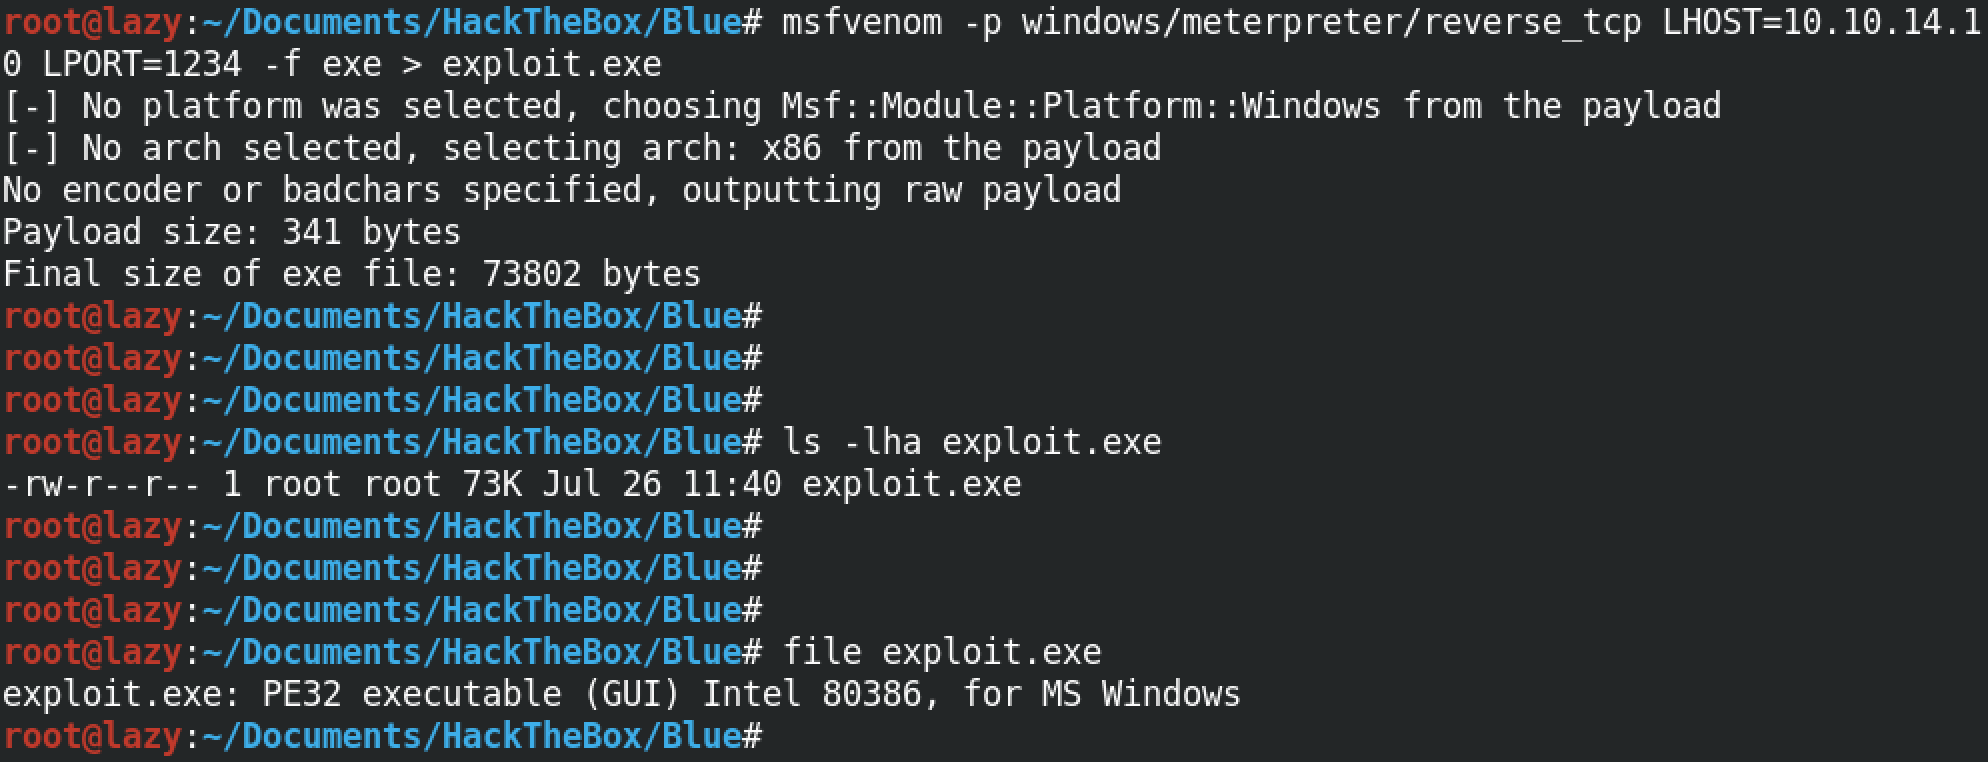 Generating a .exe payload with msfvenom.